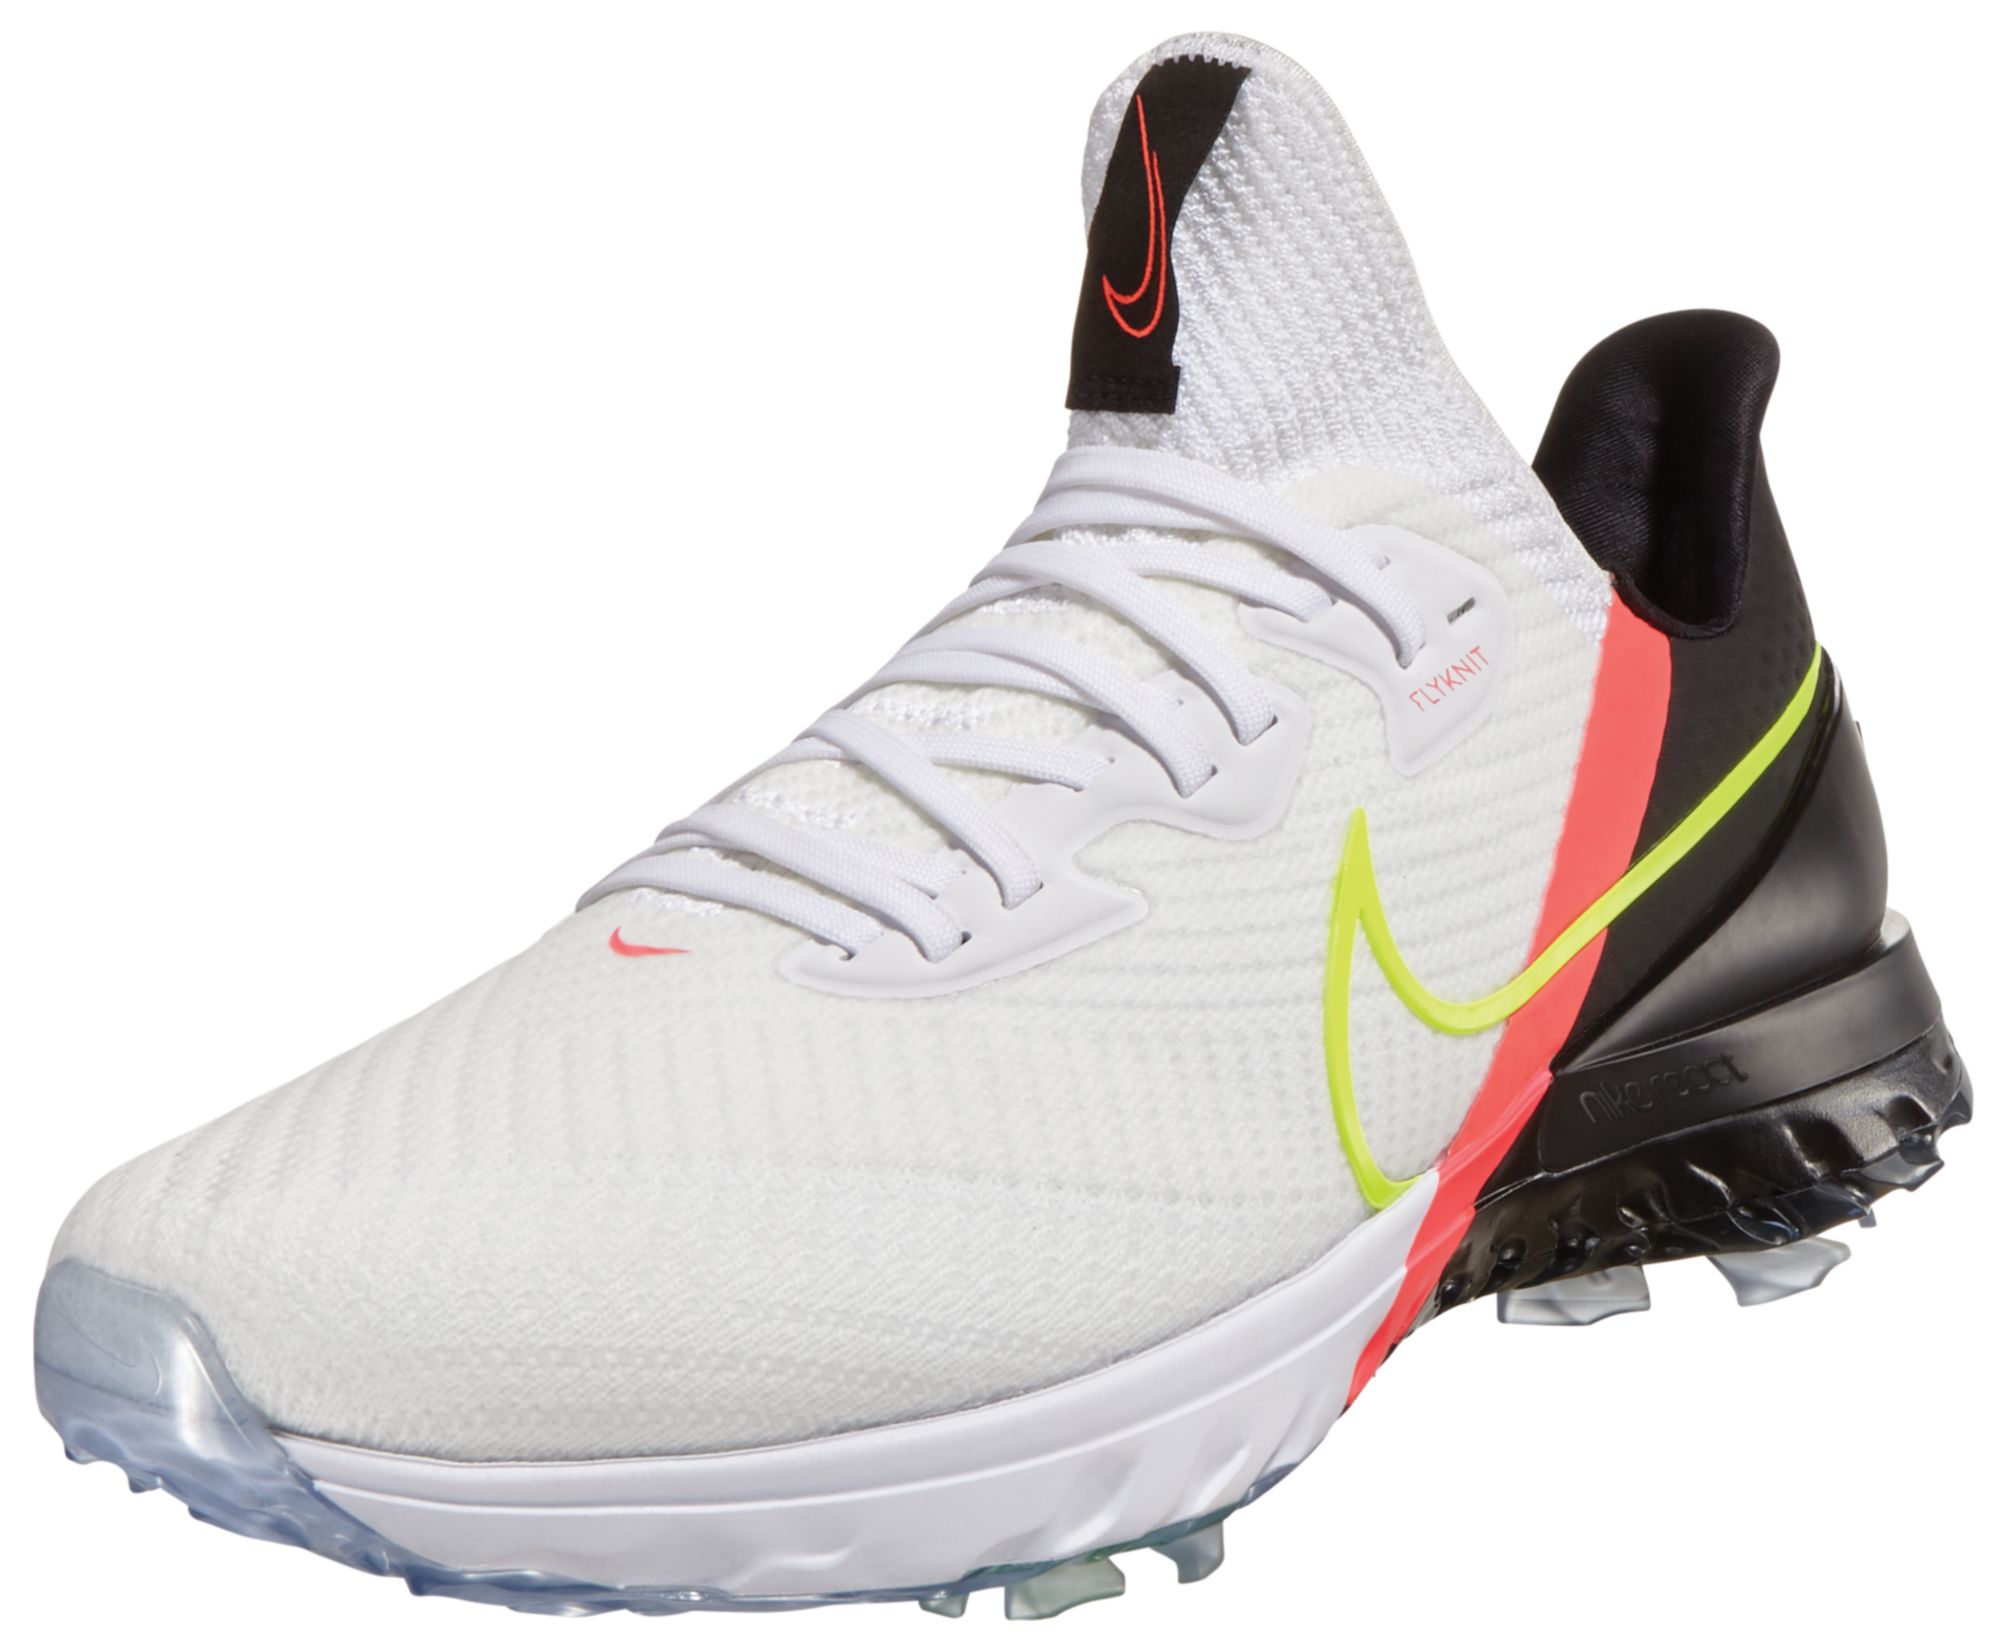 nike air zoom infinity tour release date uk